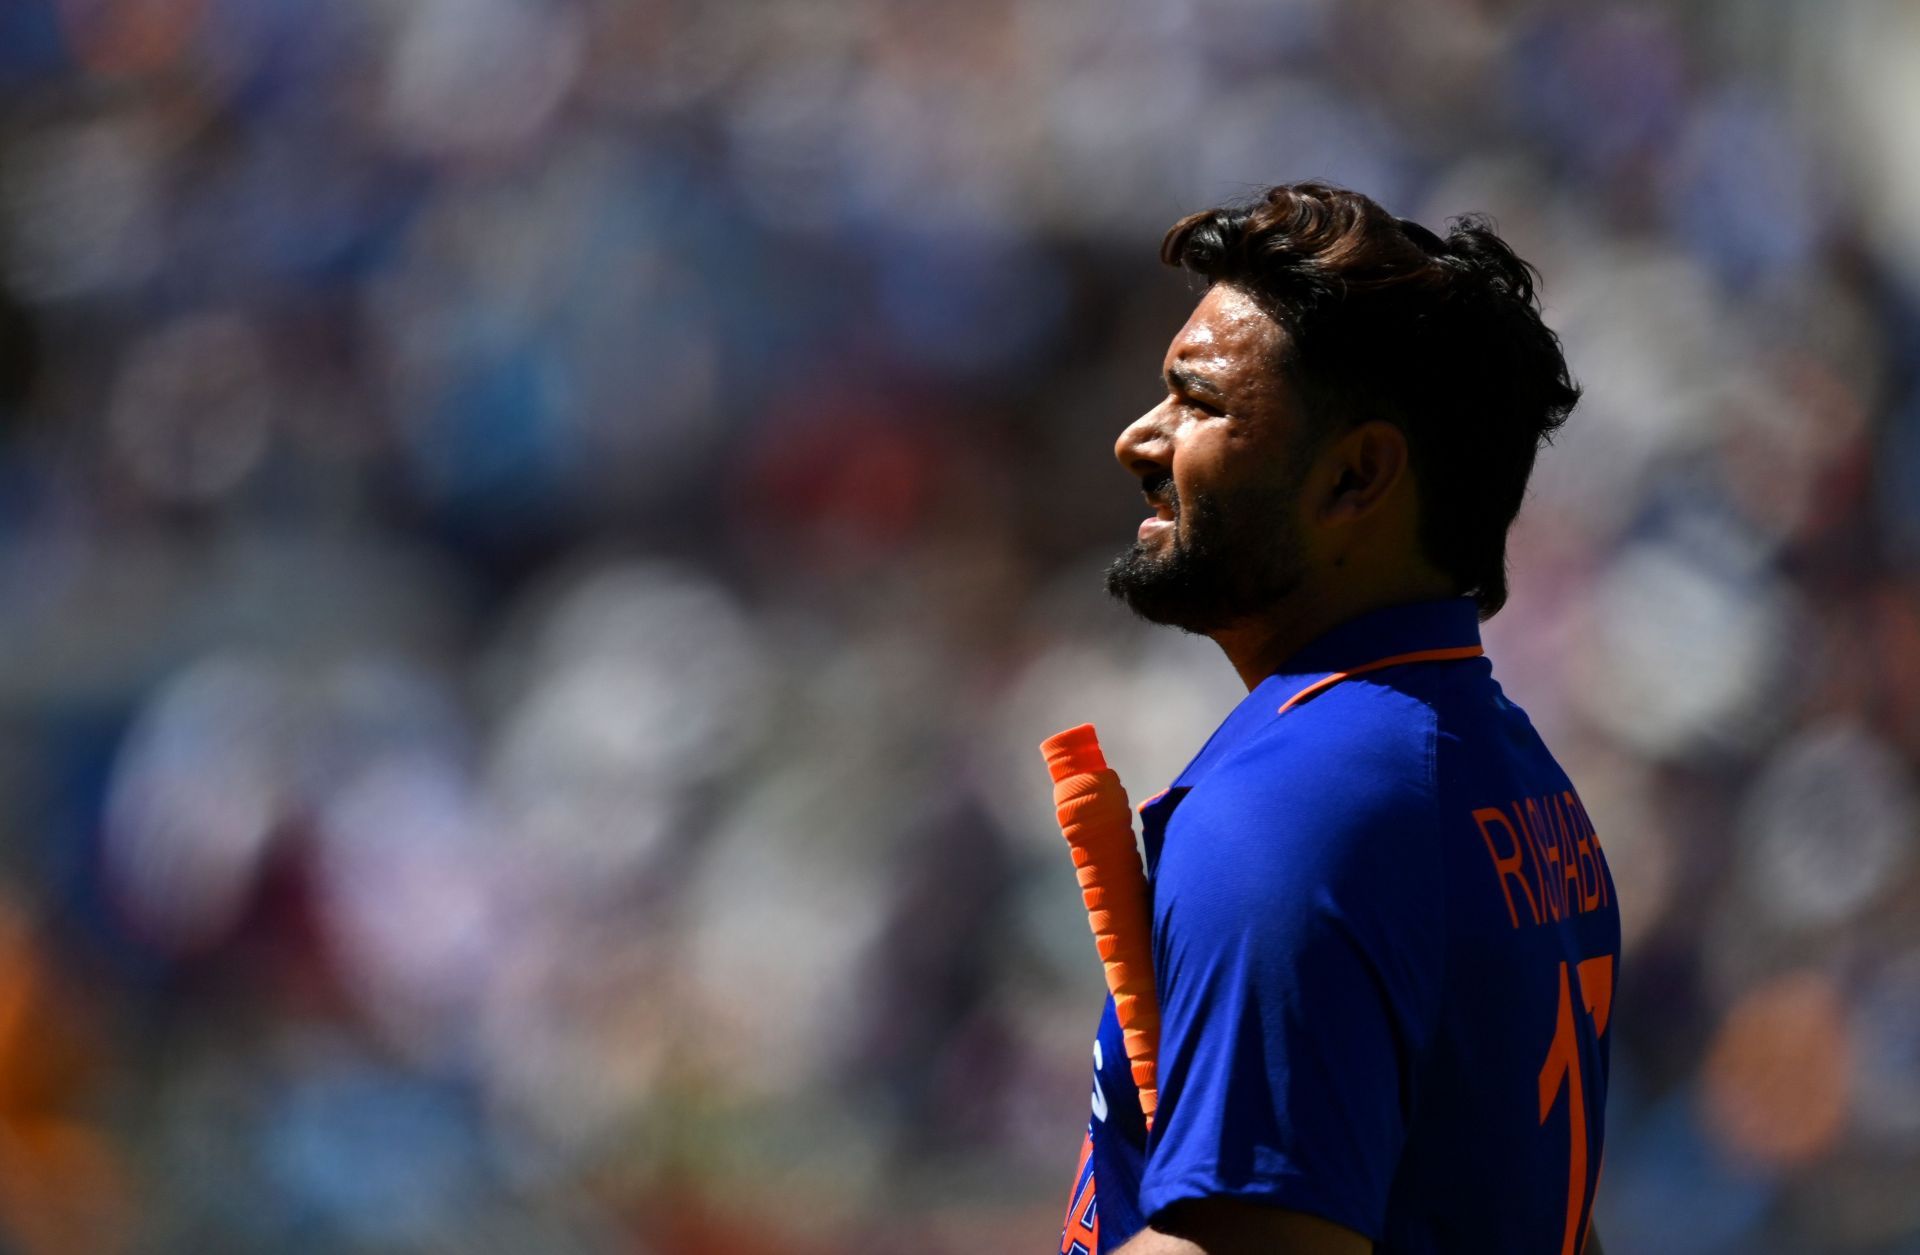 Before he became a bona fide superstar, Rishabh Pant had to deal with some hostile crowds